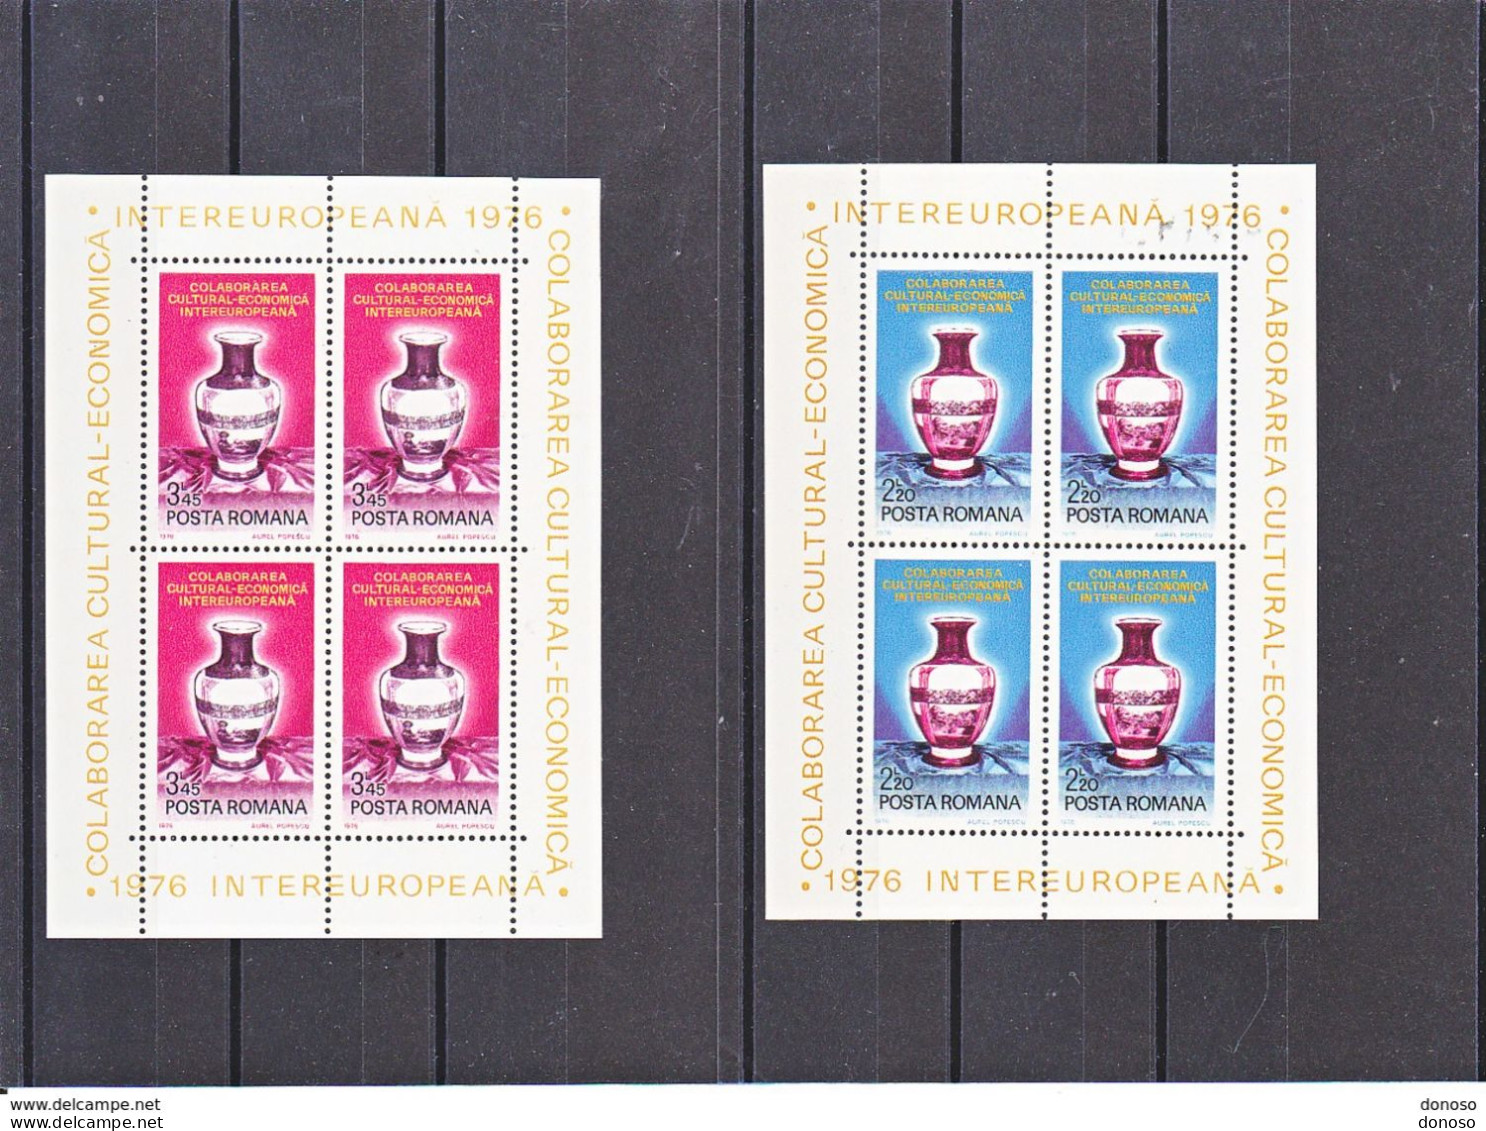 ROUMANIE 1976 EUROPE 2 FEUILLETS Yvert 2960-2961 Michel Bl 133-134 NEUF** MNH Cote 12 Euros - Unused Stamps